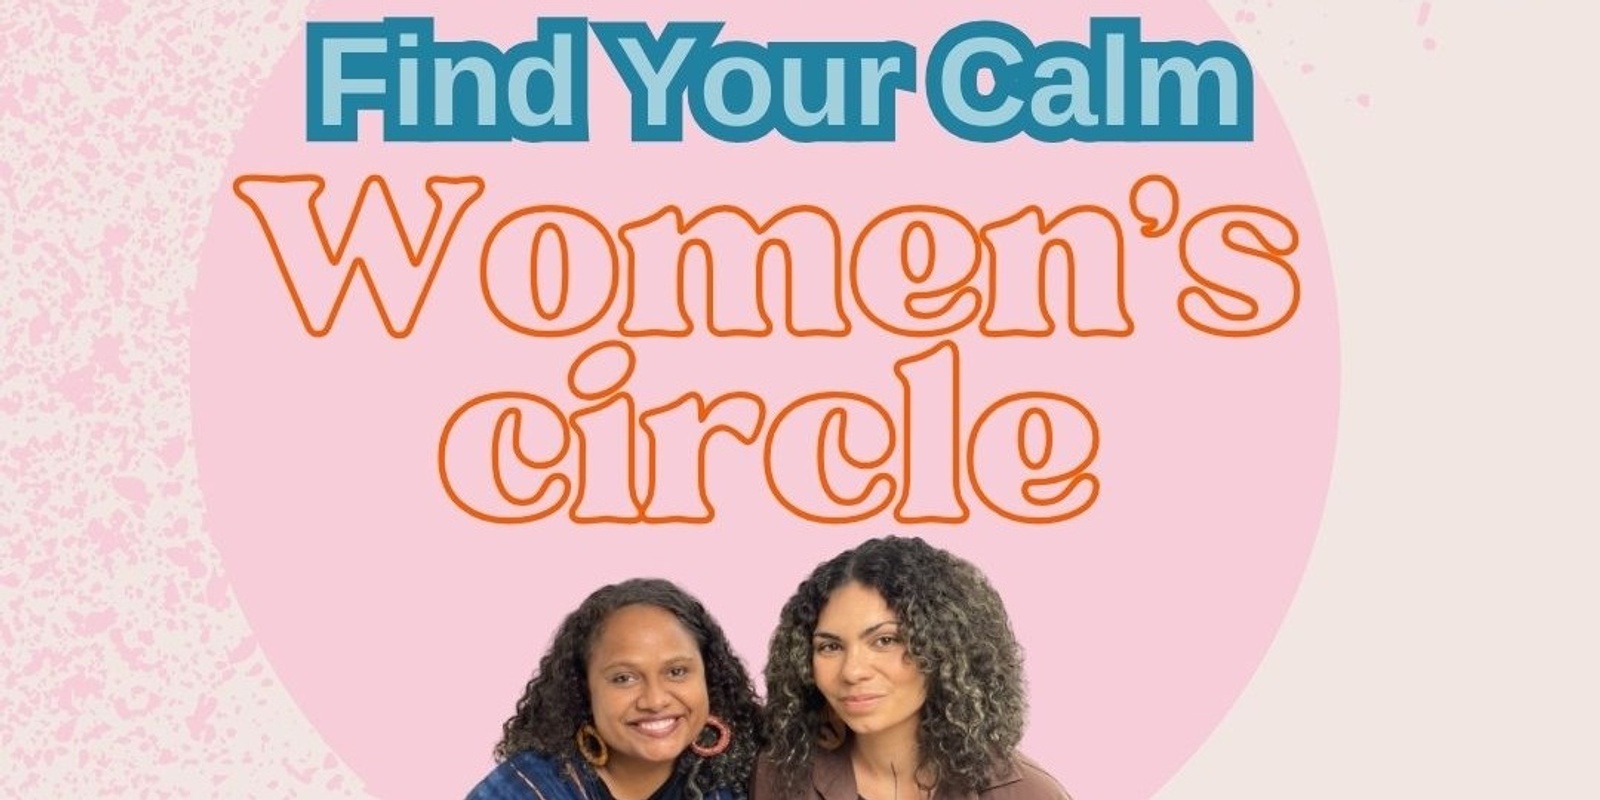 Banner image for Find your calm women's circle 